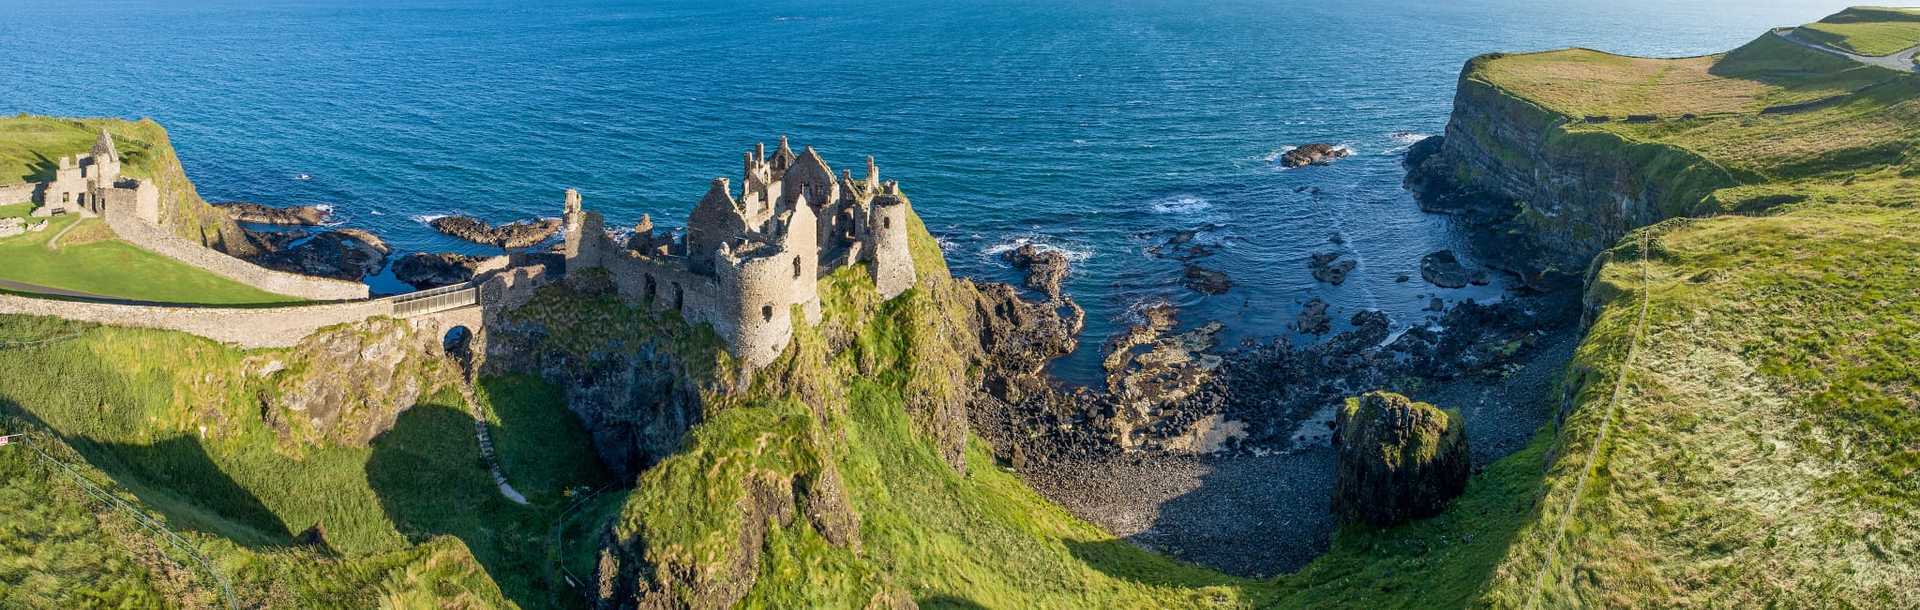 Ruins of medieval Dunluce Castle on a steep cliff on the northern coast of County Antrim, Northern Ireland, UK. 